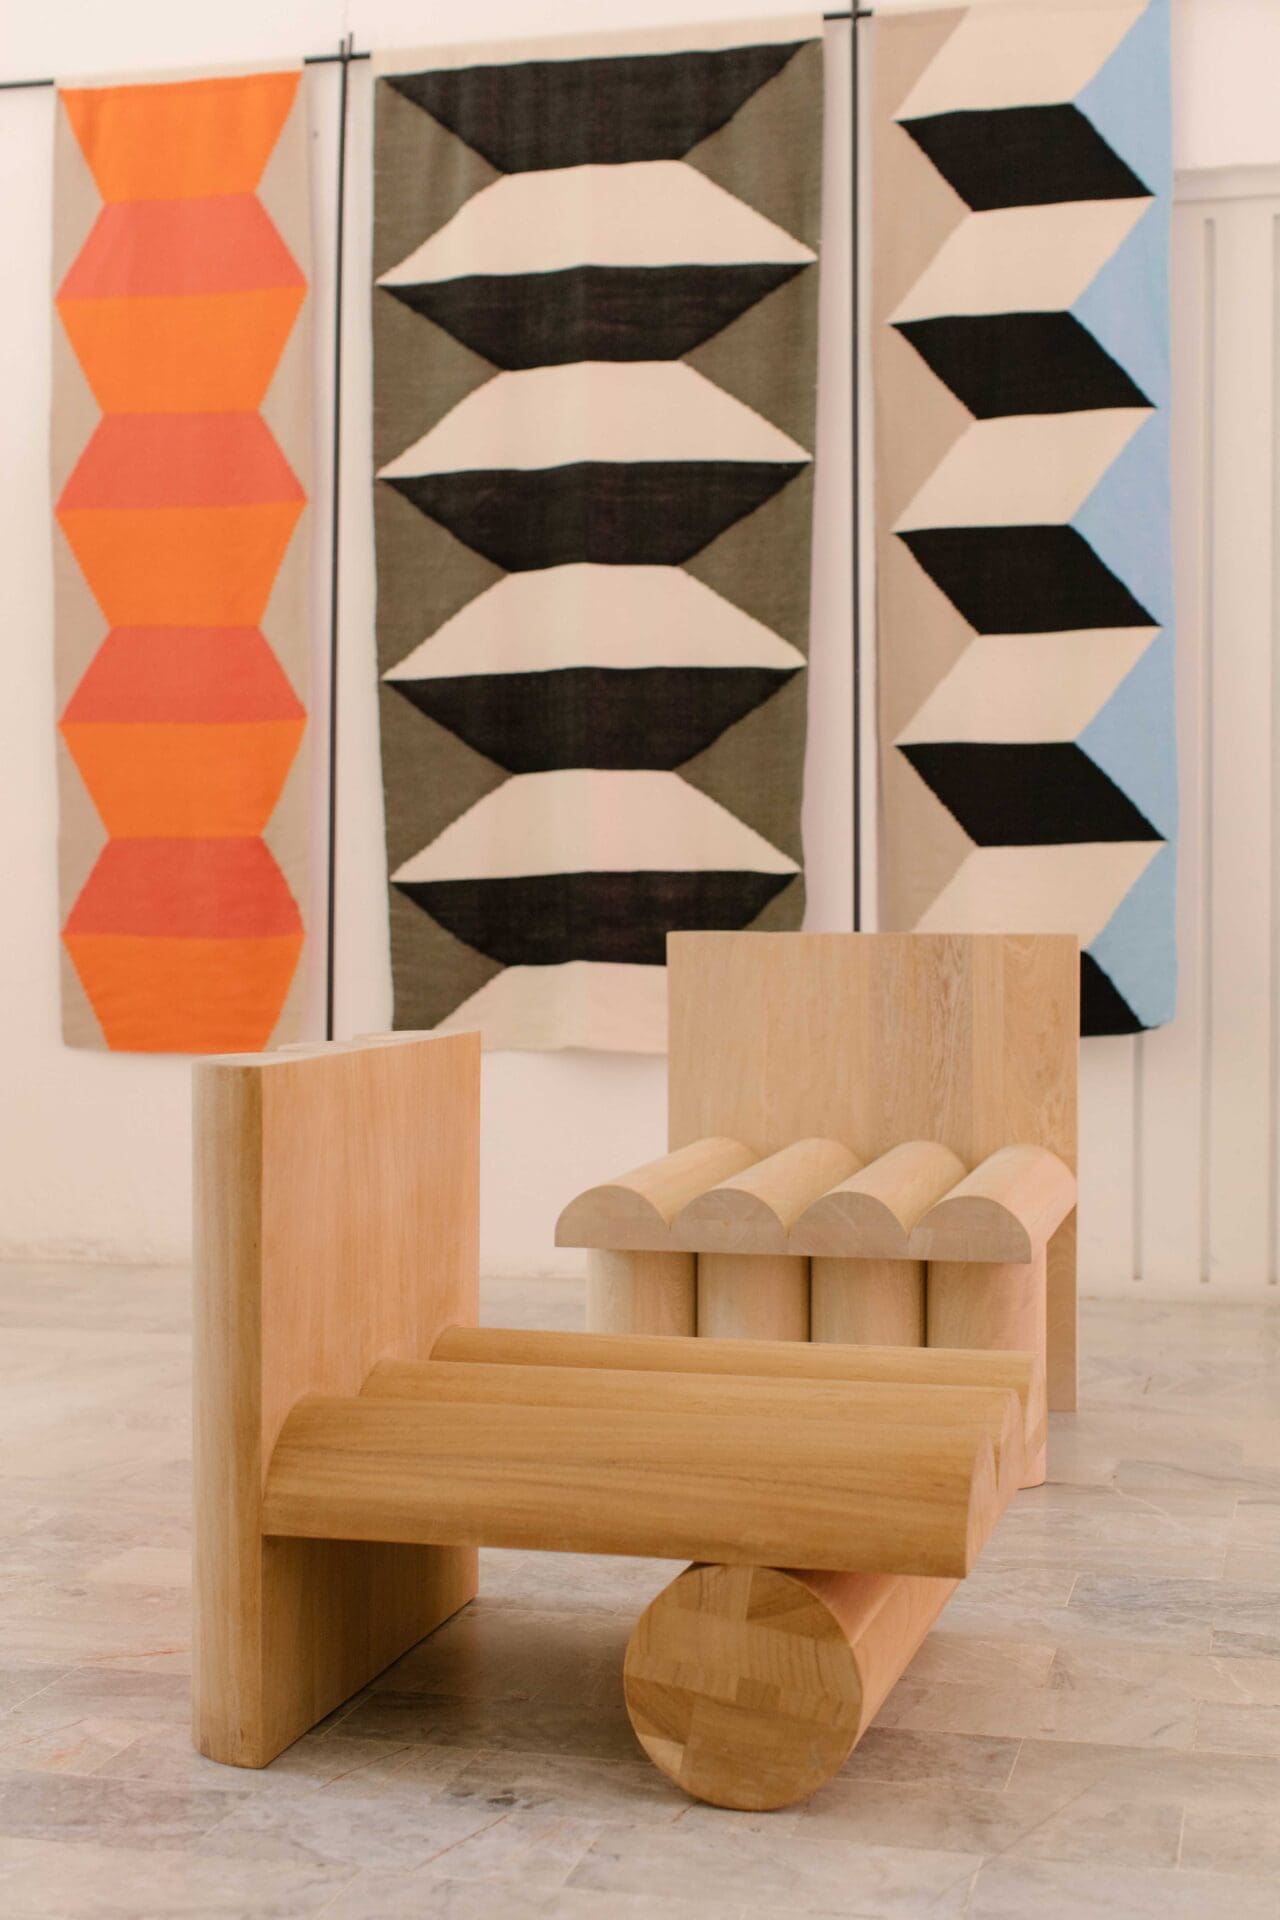 Javier Reyes, rrres studio, Oaxacao | A light-wooden chair in front of a graphic painting with trompe l'oeil shapes